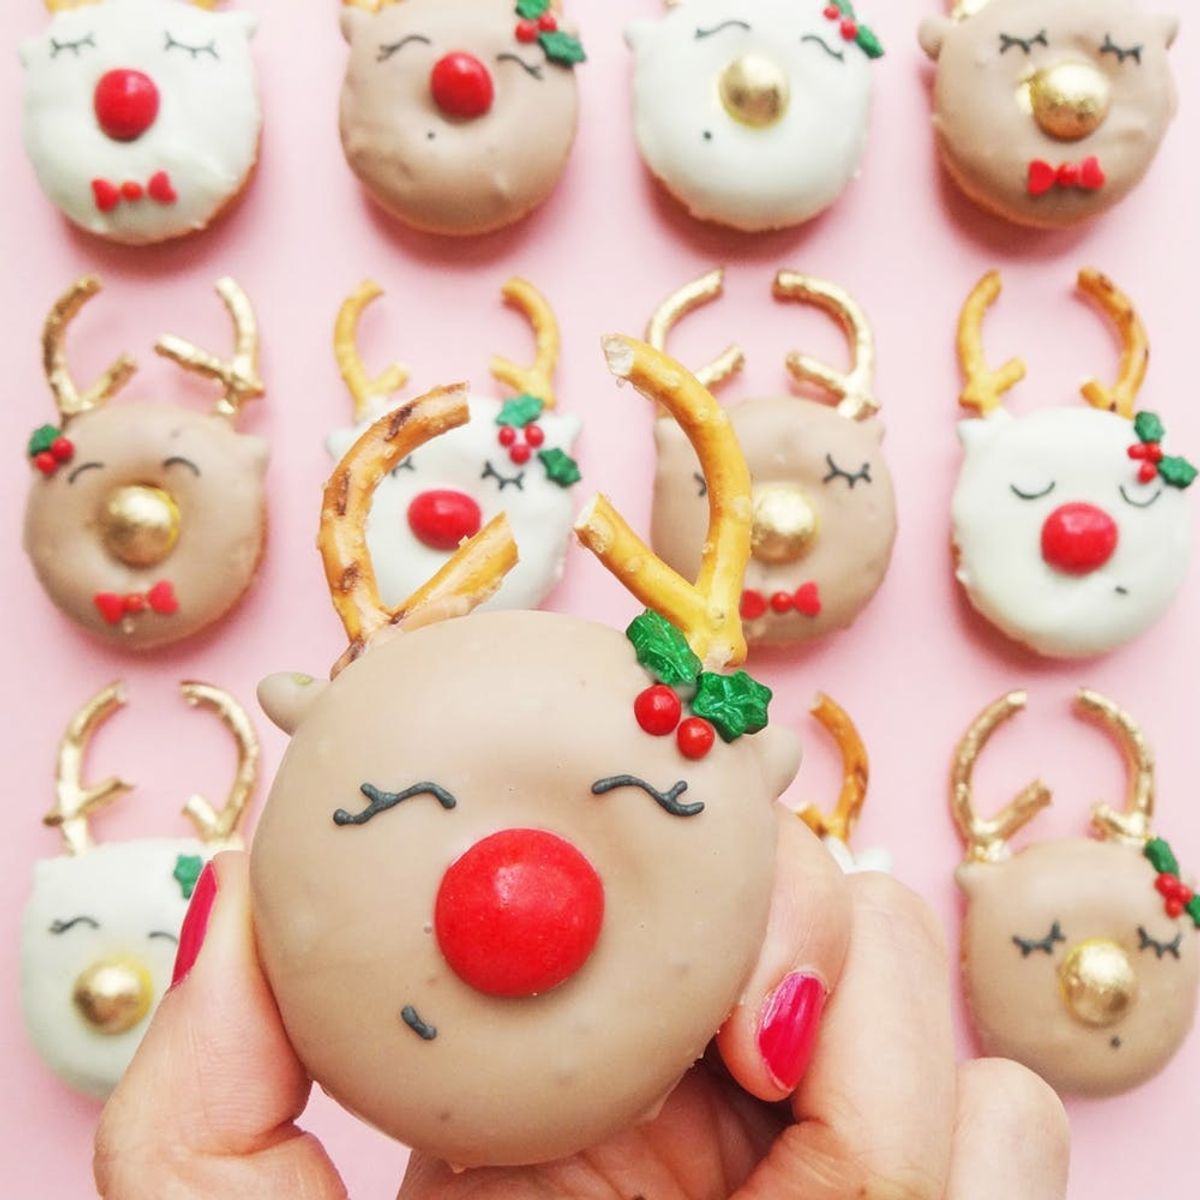 Spice Up Your Holiday Season With These Gingerbread Reindeer Donuts